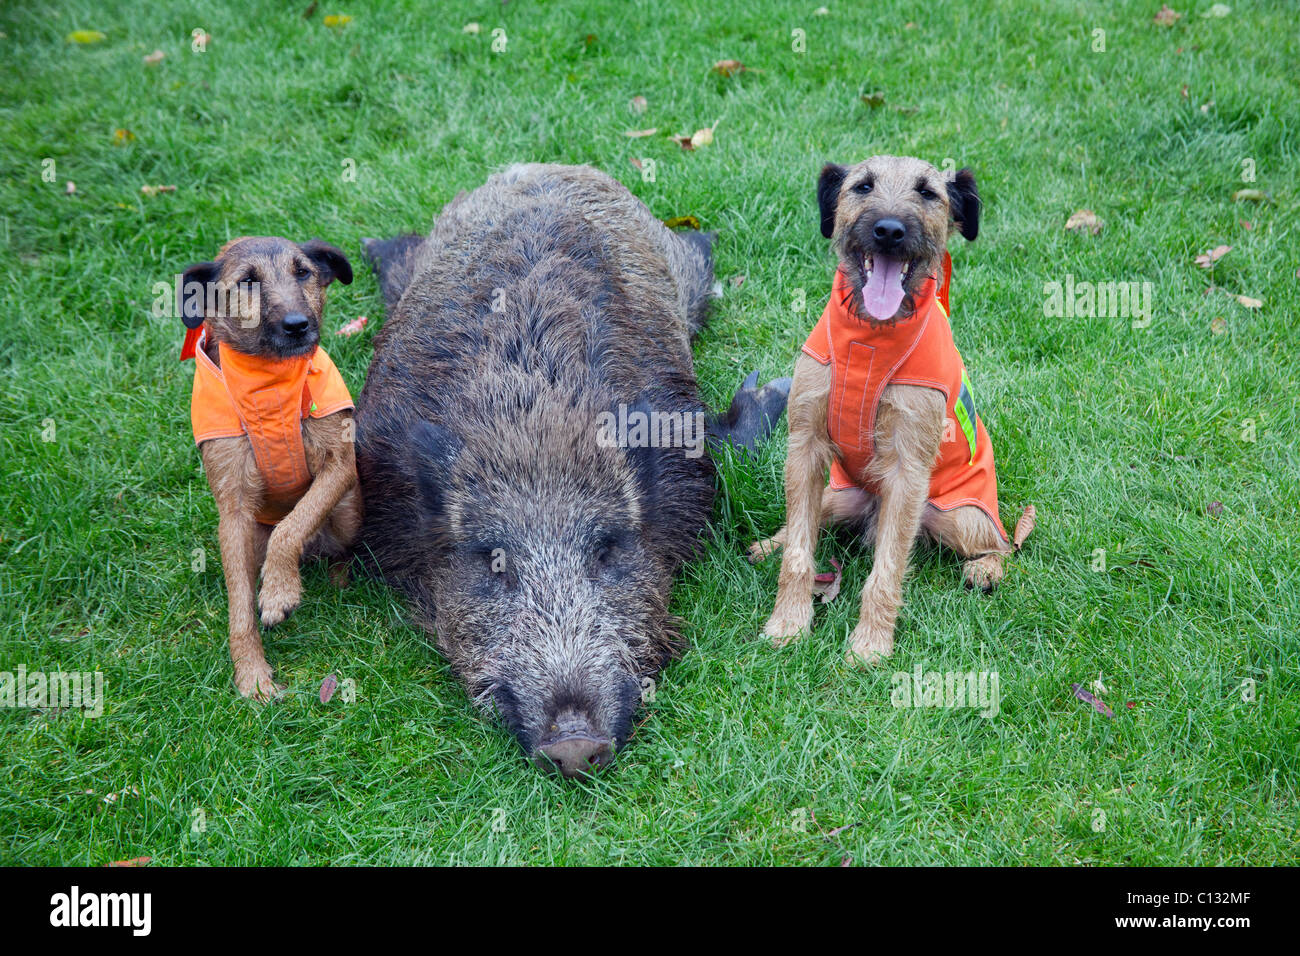 Coore Wild Boar Dog